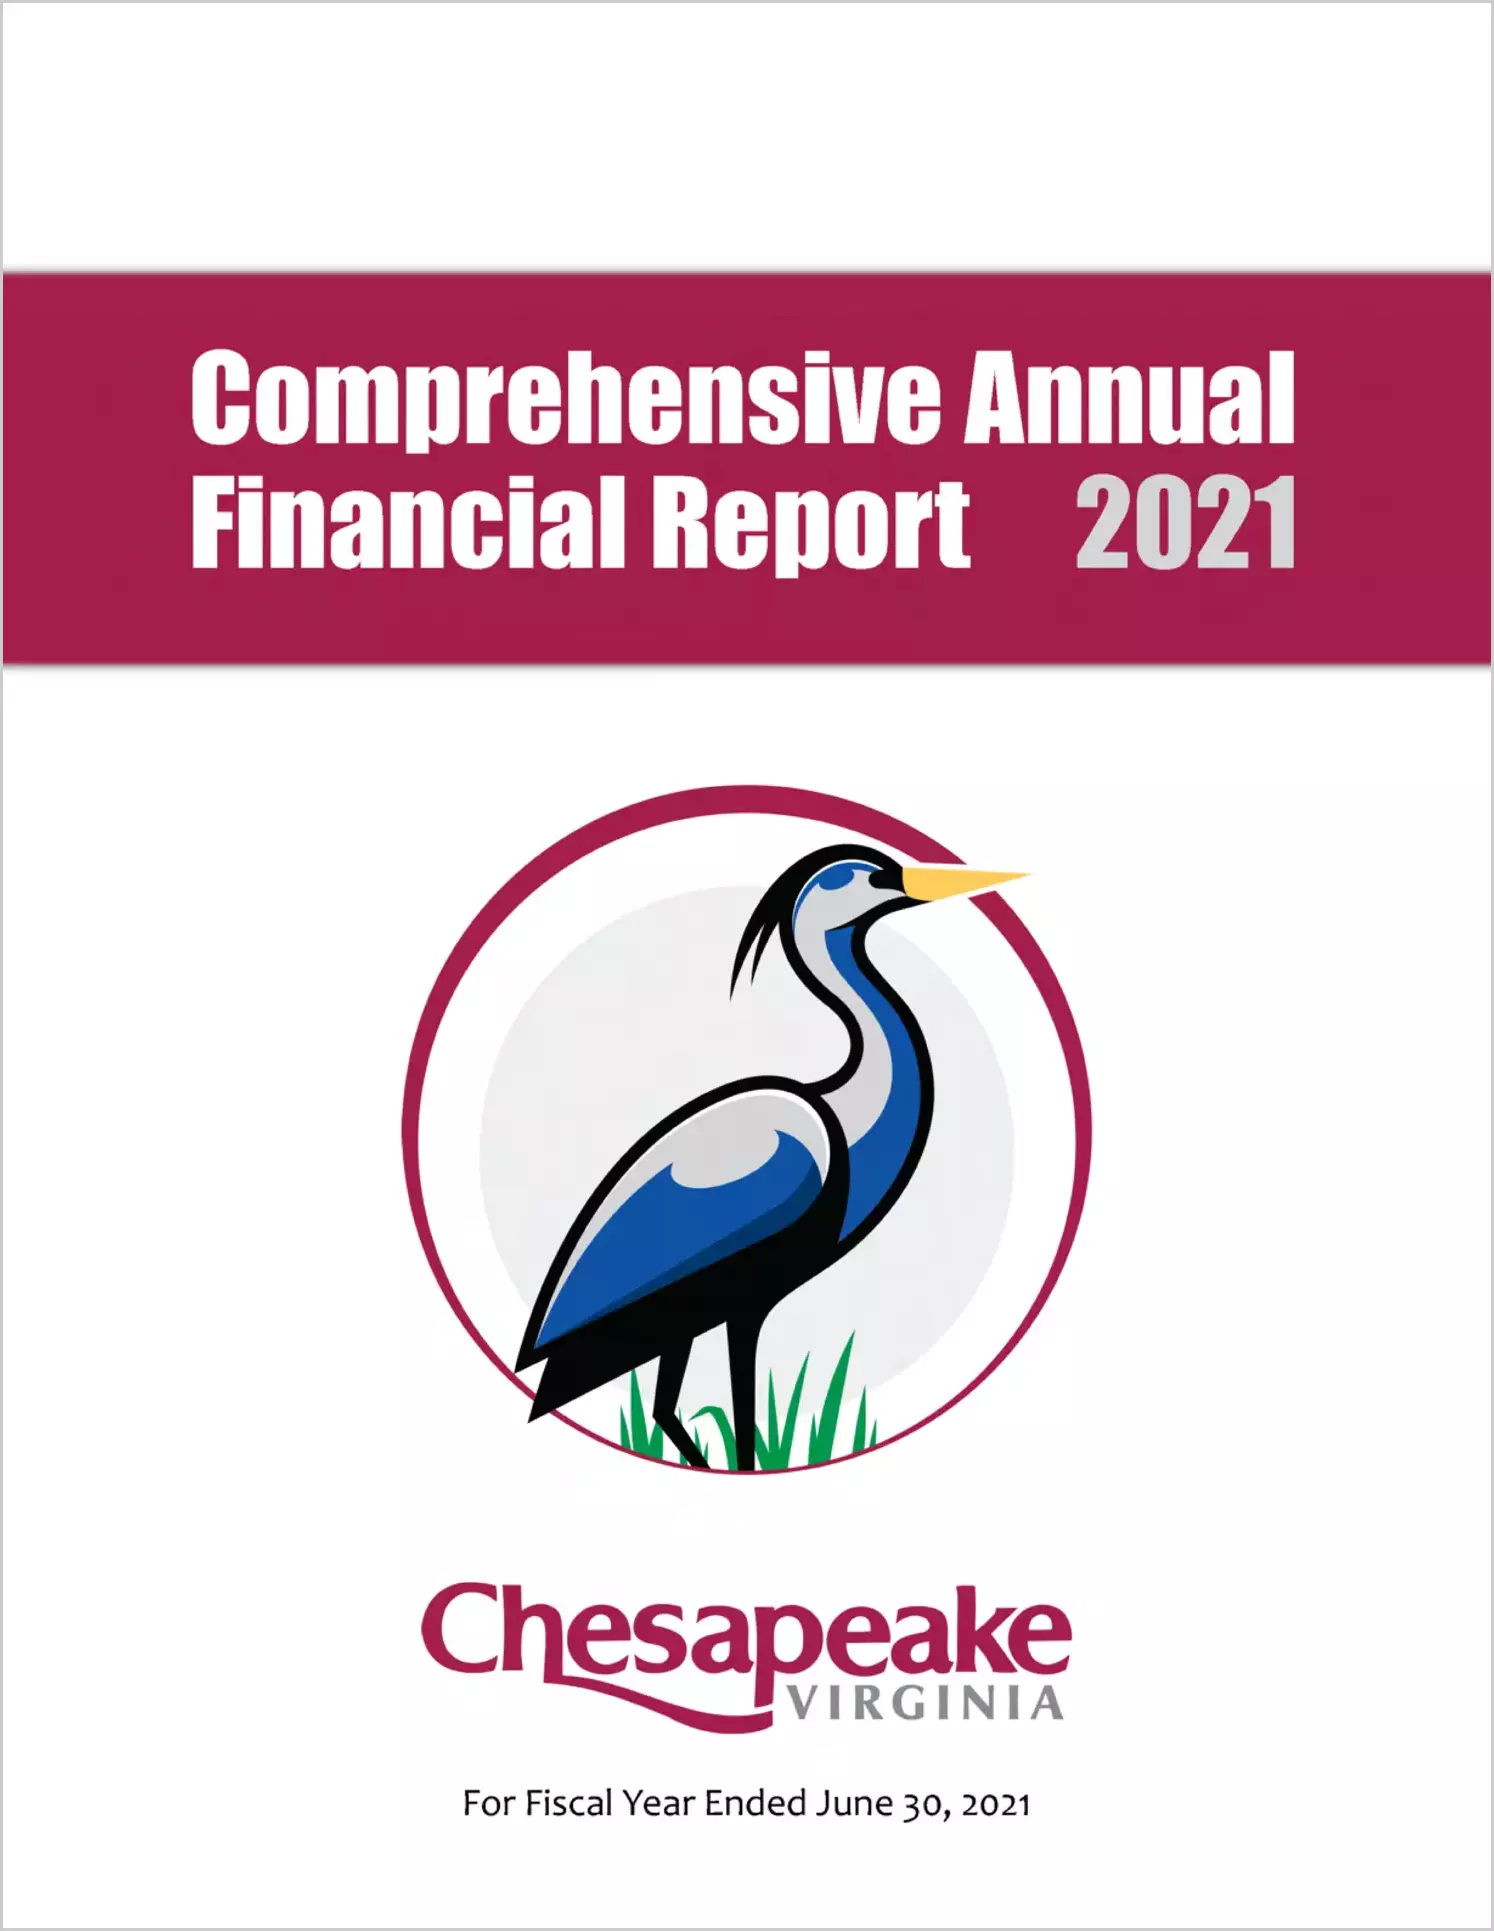 2021 Annual Financial Report for City of Chesapeake